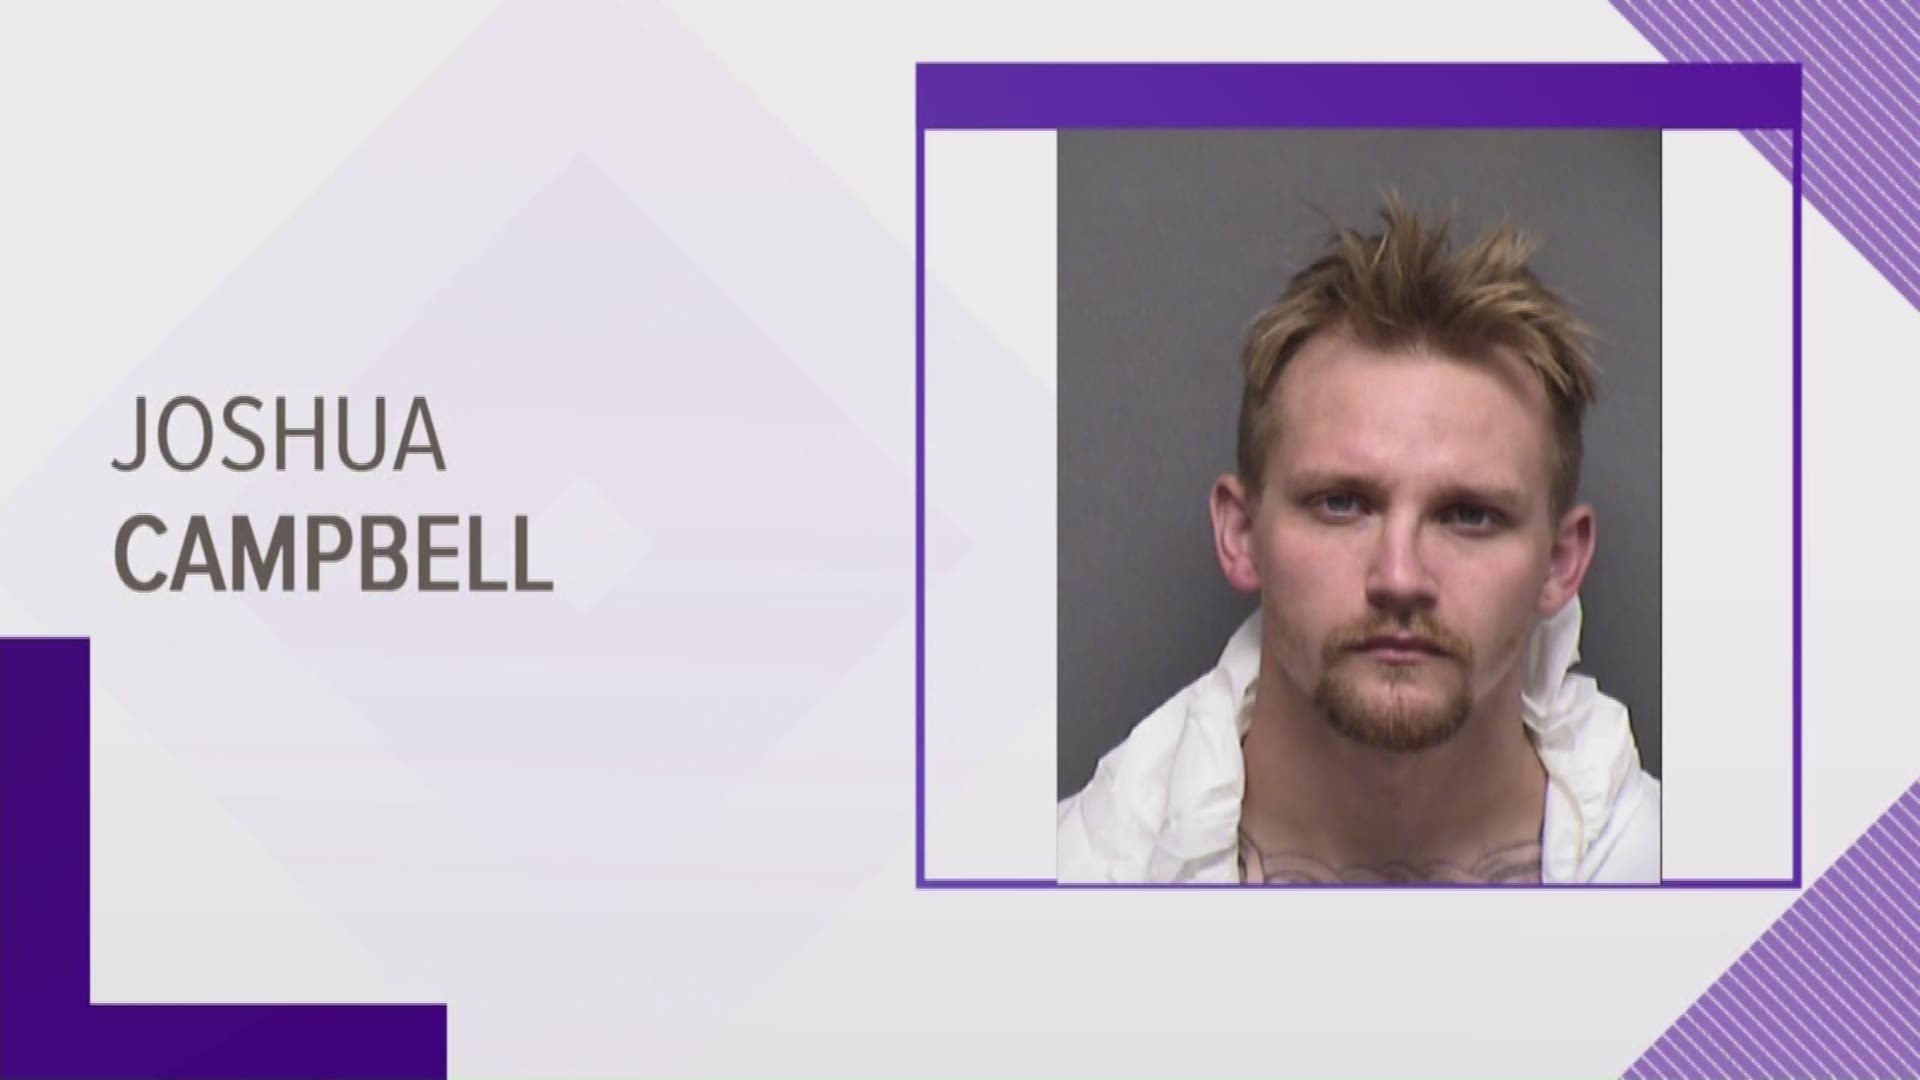 SAPD officials said Joshua Campbell was romantically involved with the victim he's accused of murdering.